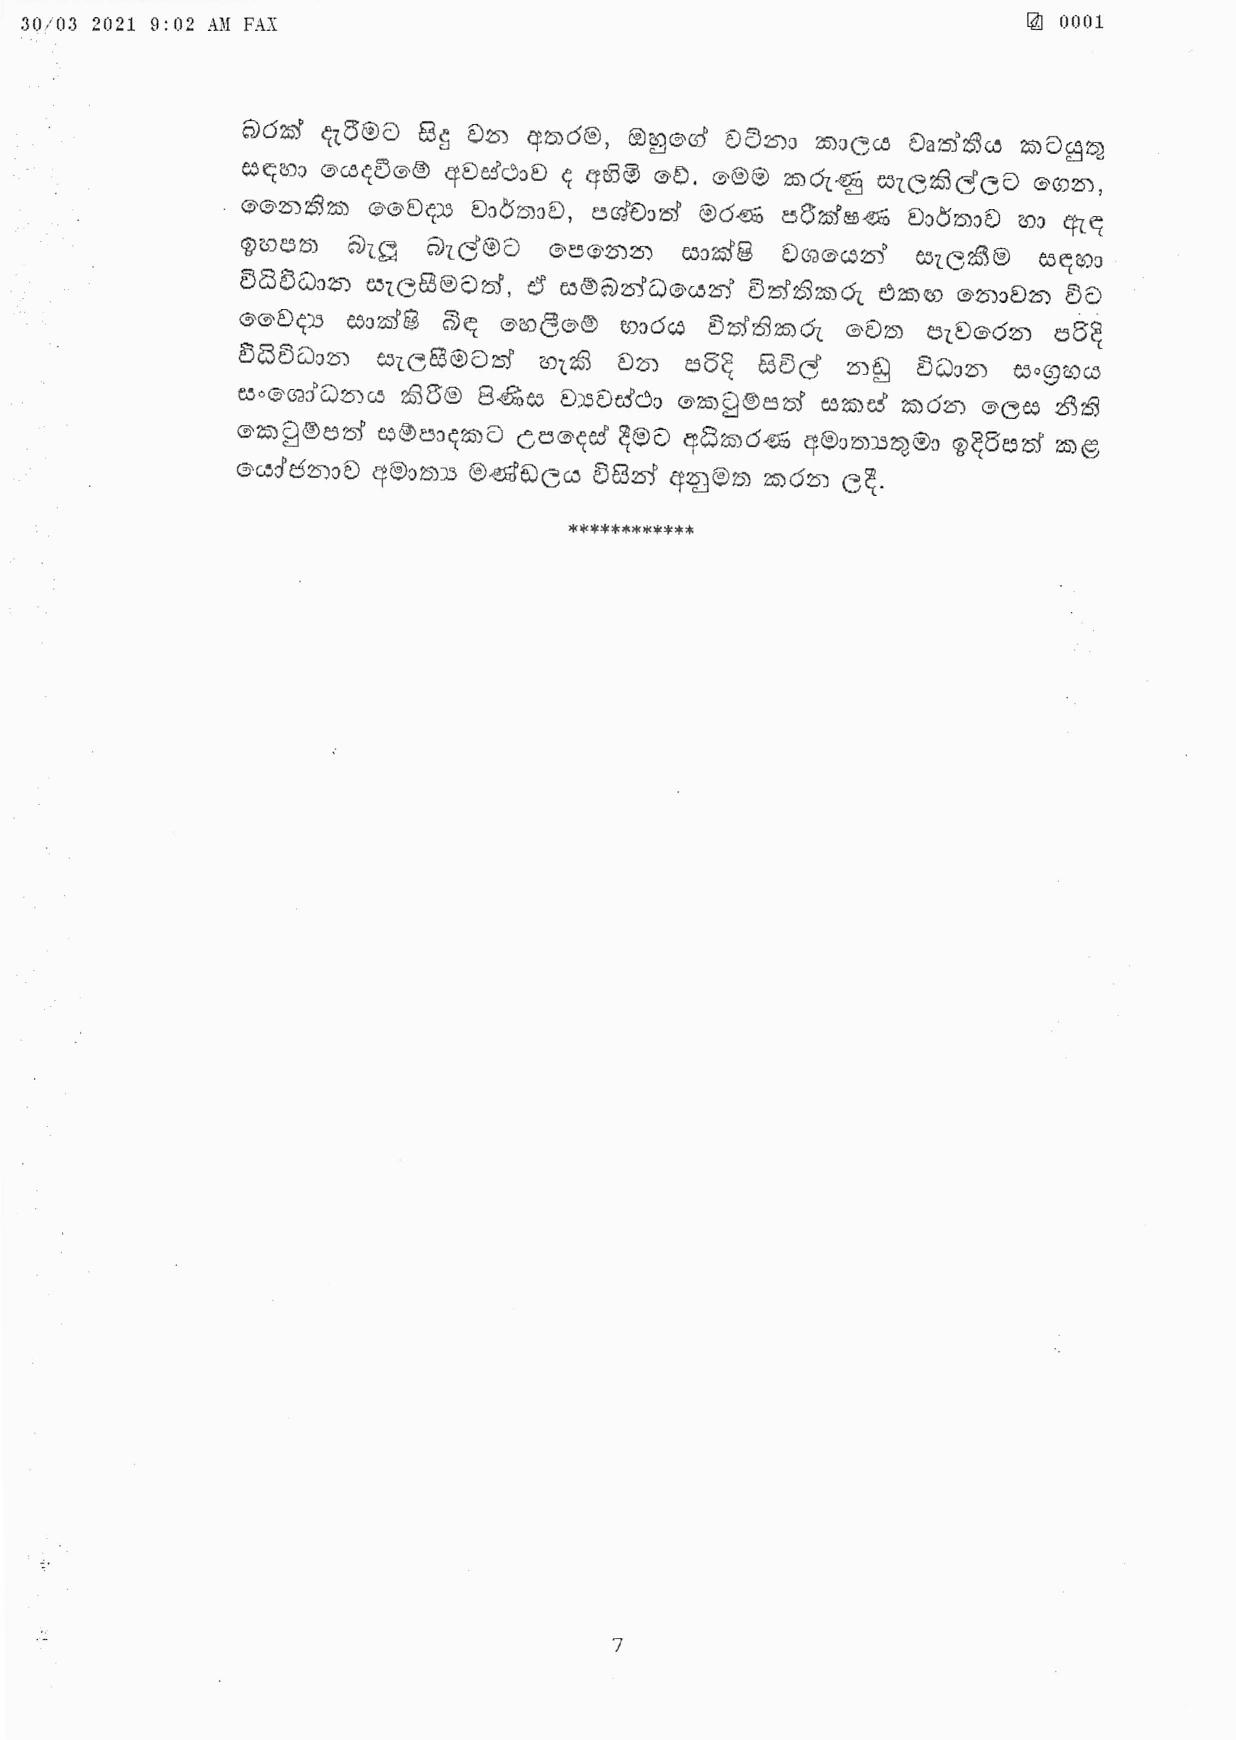 Cabinet Decision on 29.03.2021 Sinhala page 007